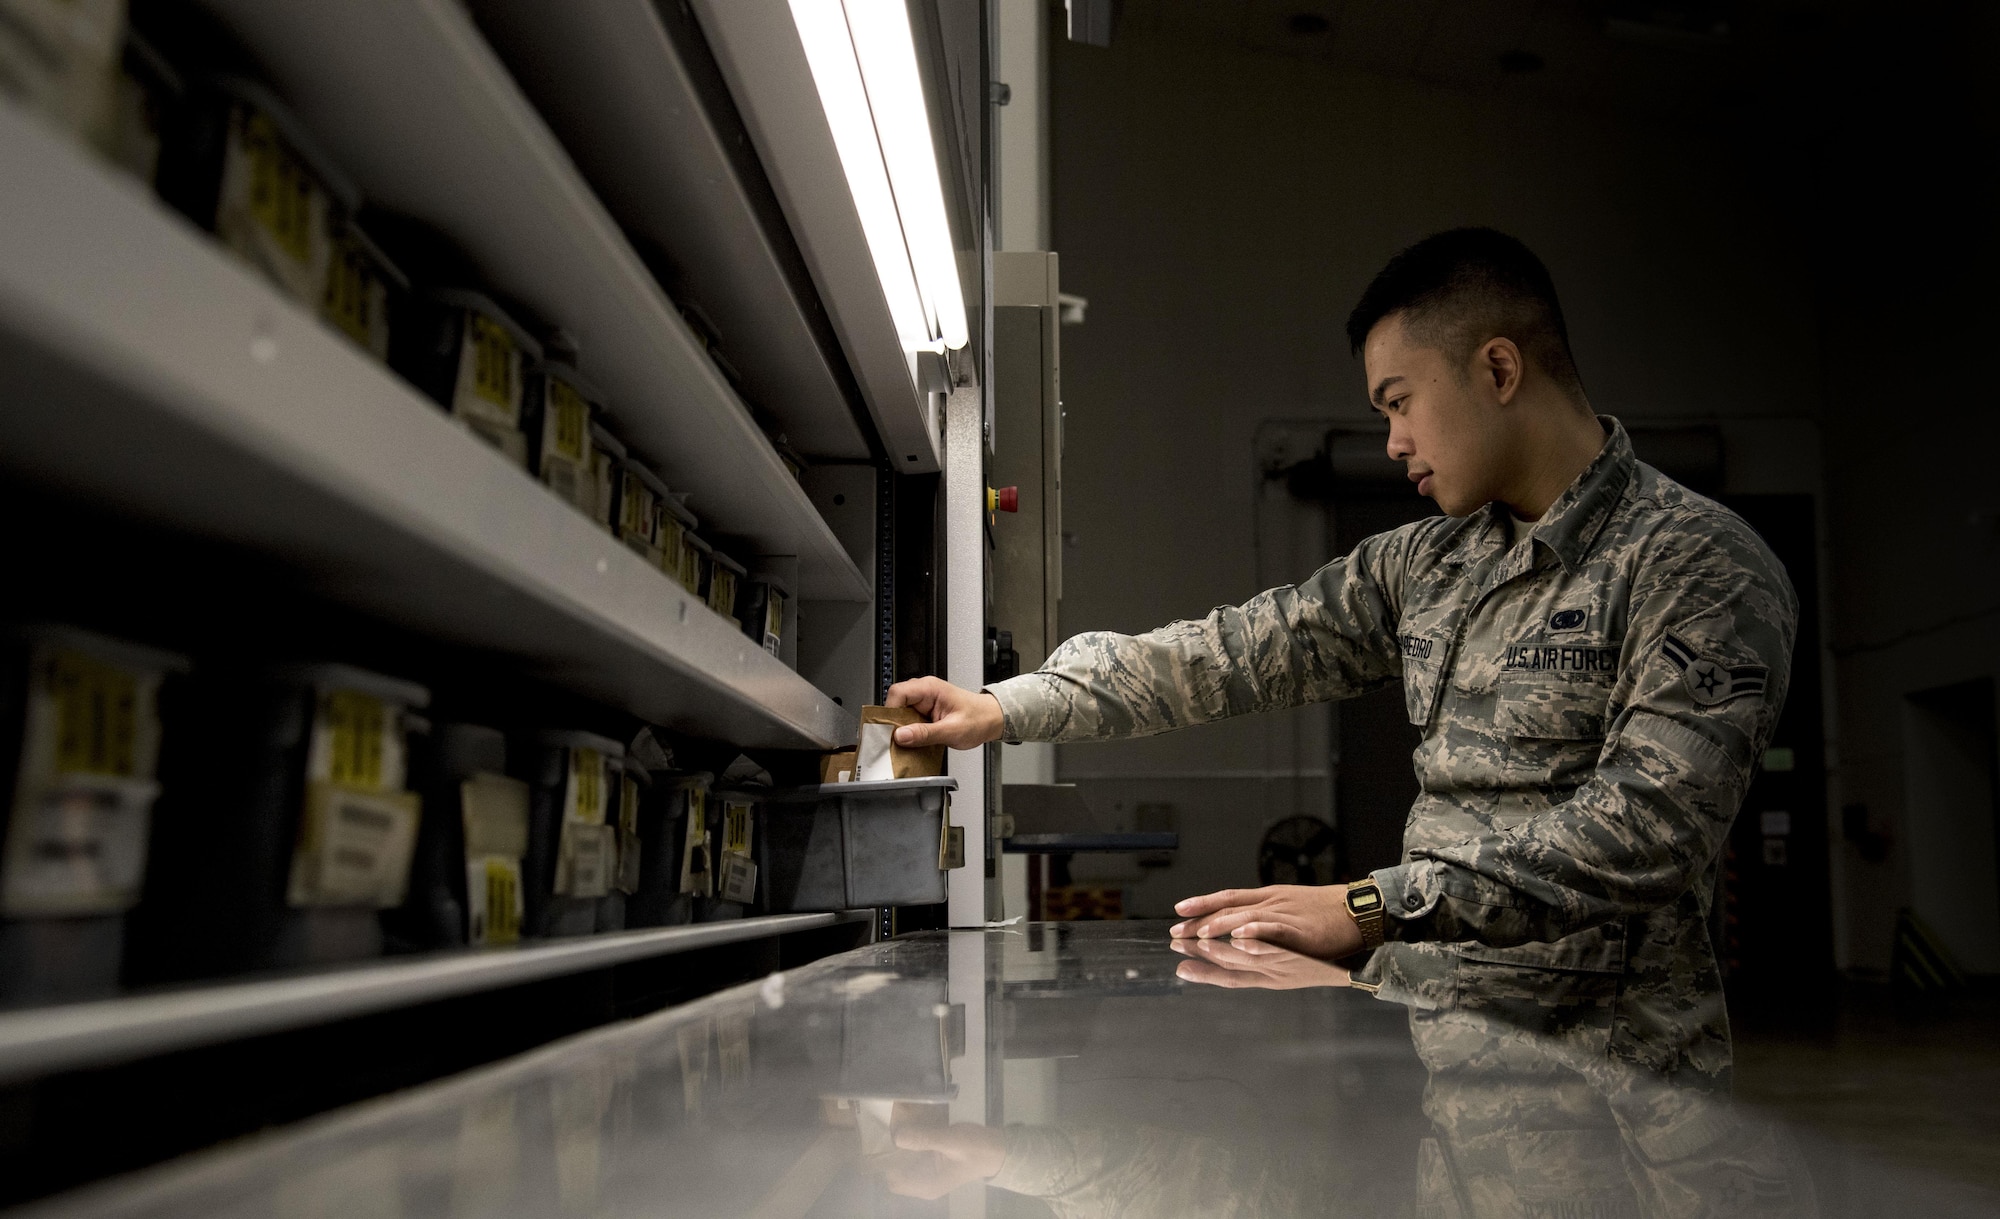 U.S. Air Force Airman 1st Class Samuel San Pedro, an aircraft parts store apprentice with the 35th Logistics Readiness Squadron, inspects a bin of electric bushings at Misawa Air Base, Japan, Sept. 20, 2016. Inventory is conducted monthly to ensure all aircraft items are serviceable. (U.S. Air Force photo by Airman 1st Class Sadie Colbert)